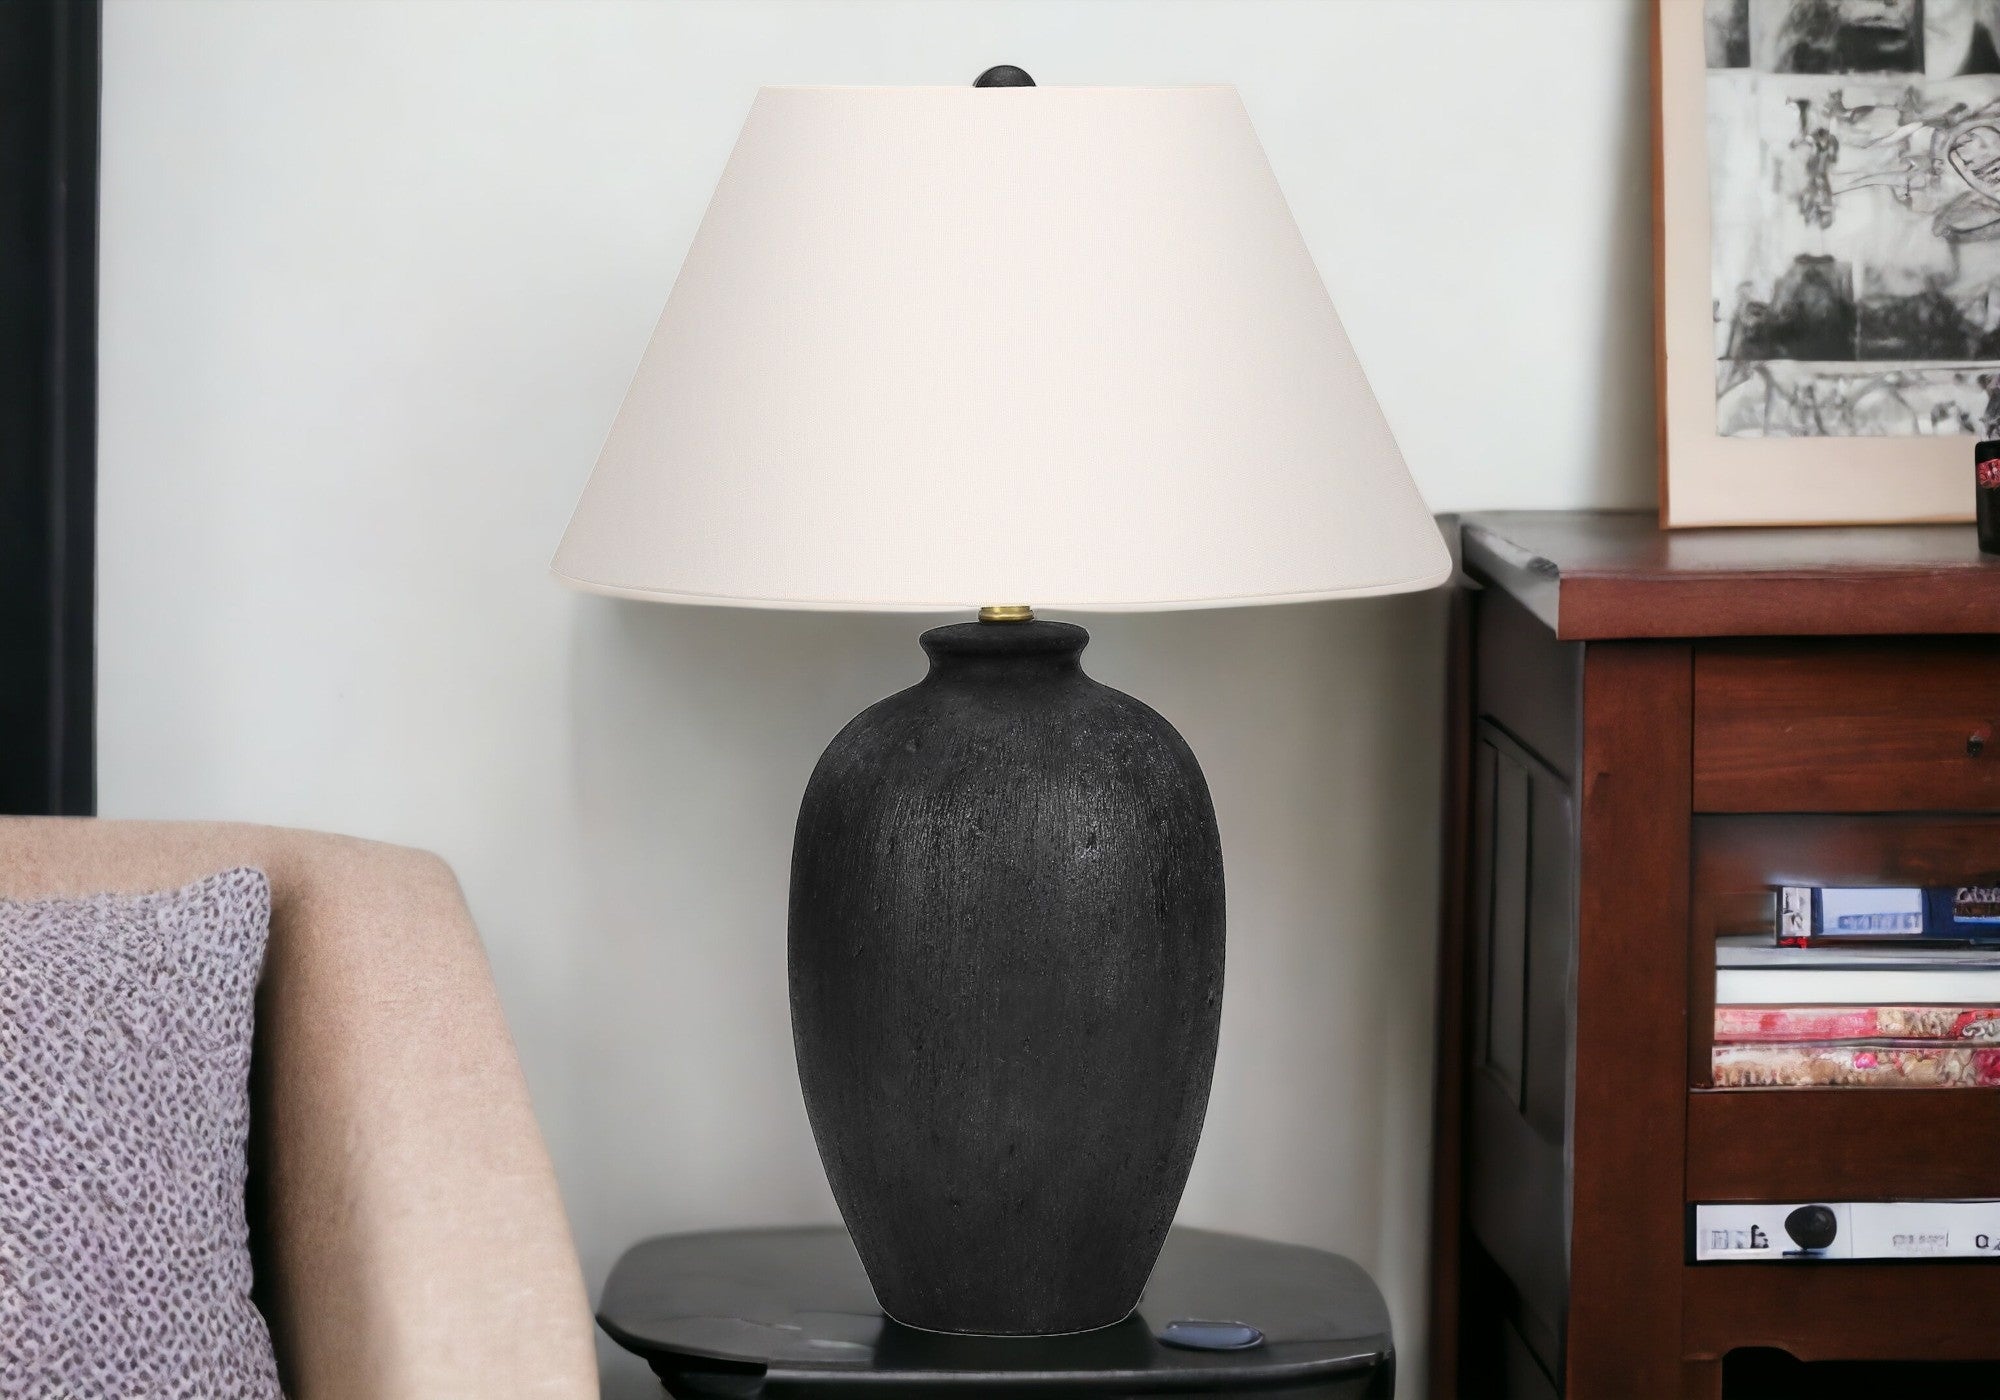 24" Black Ceramic Round Table Lamp With Ivory Empire Shade